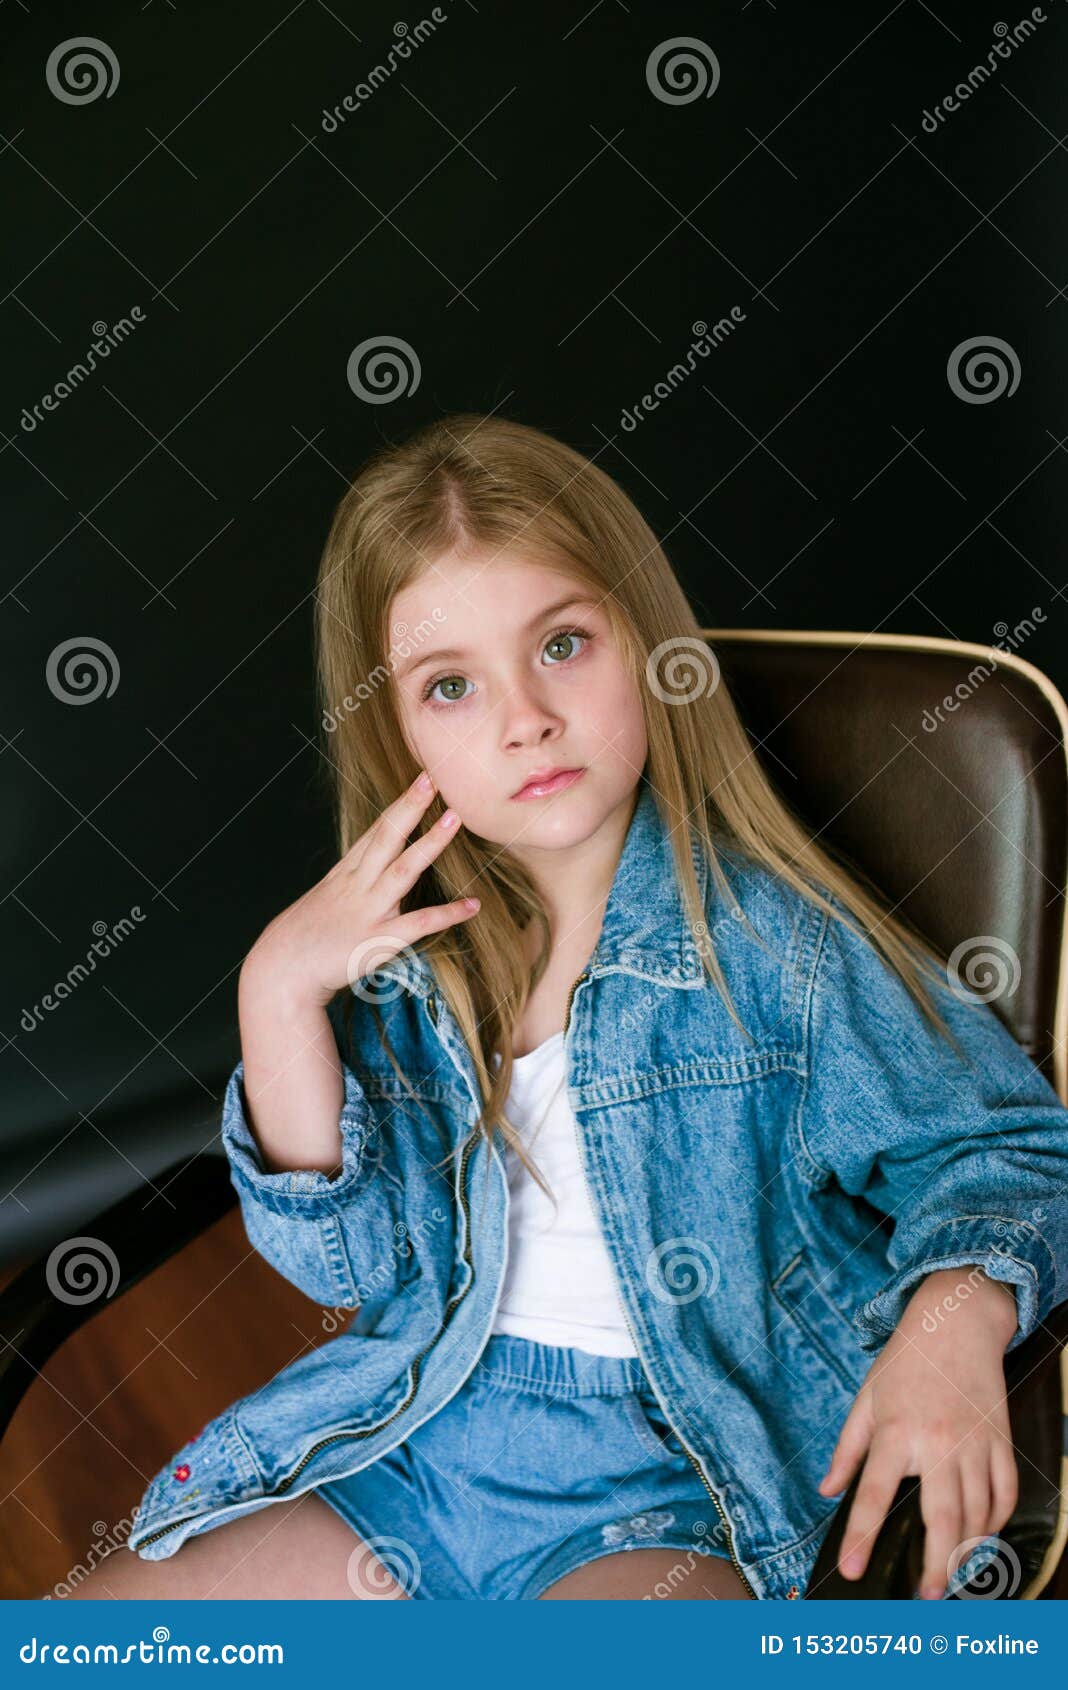 Beautiful Fashionable Little Girl With Blond Hair In Jeans Clothes On A Black Background Stock Photo Image Of Clothing Happy 153205740